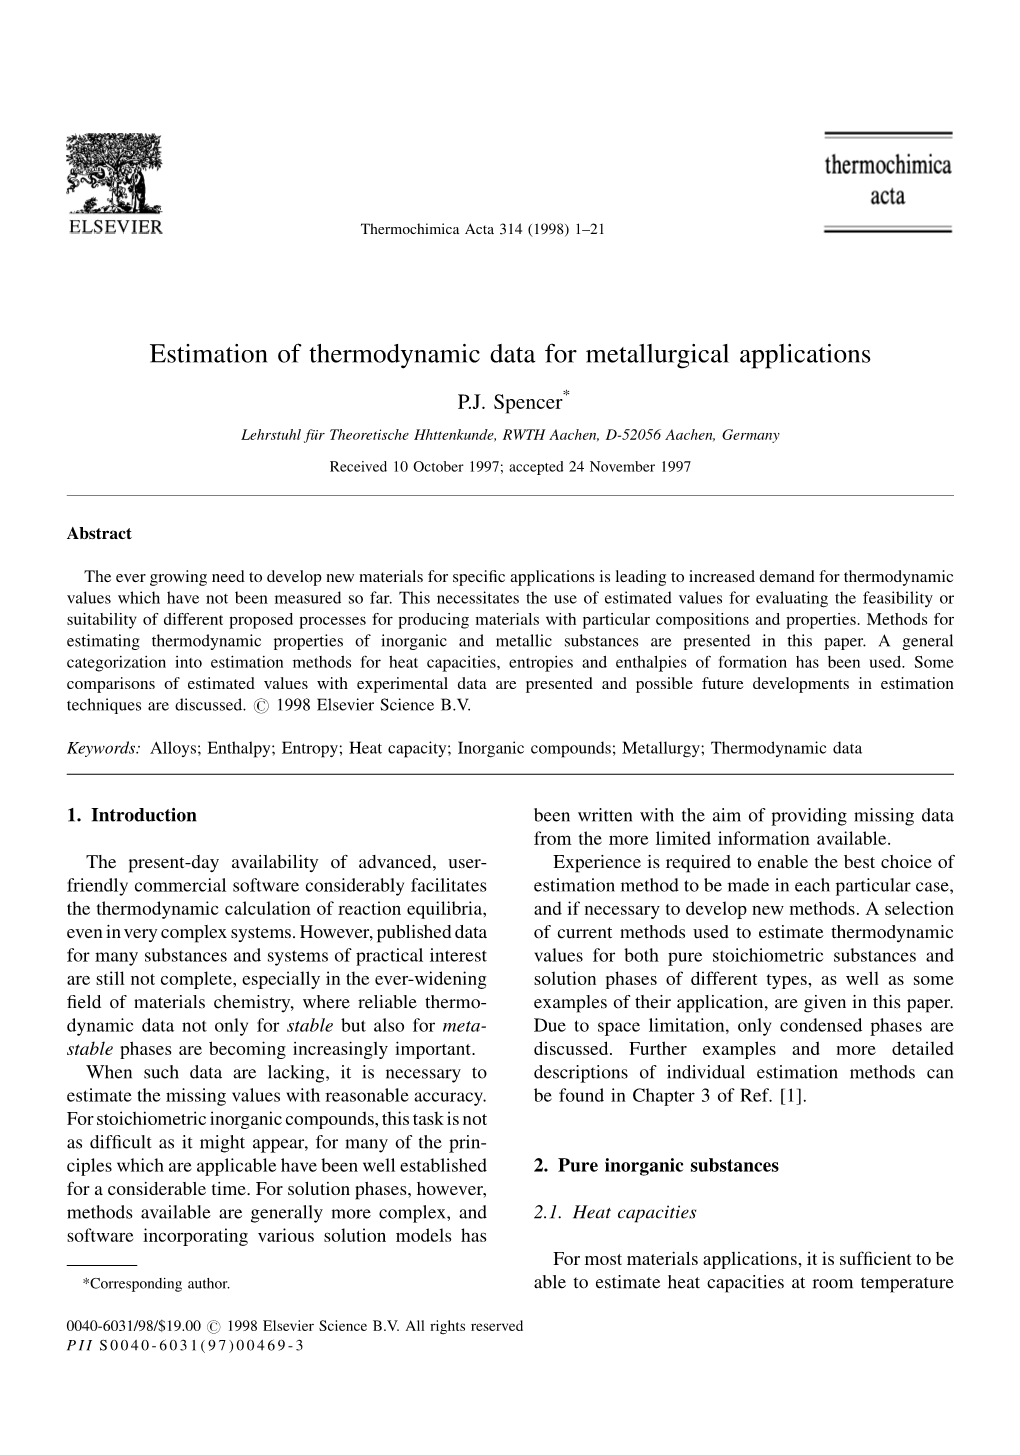 Estimation of Thermodynamic Data for Metallurgical Applications